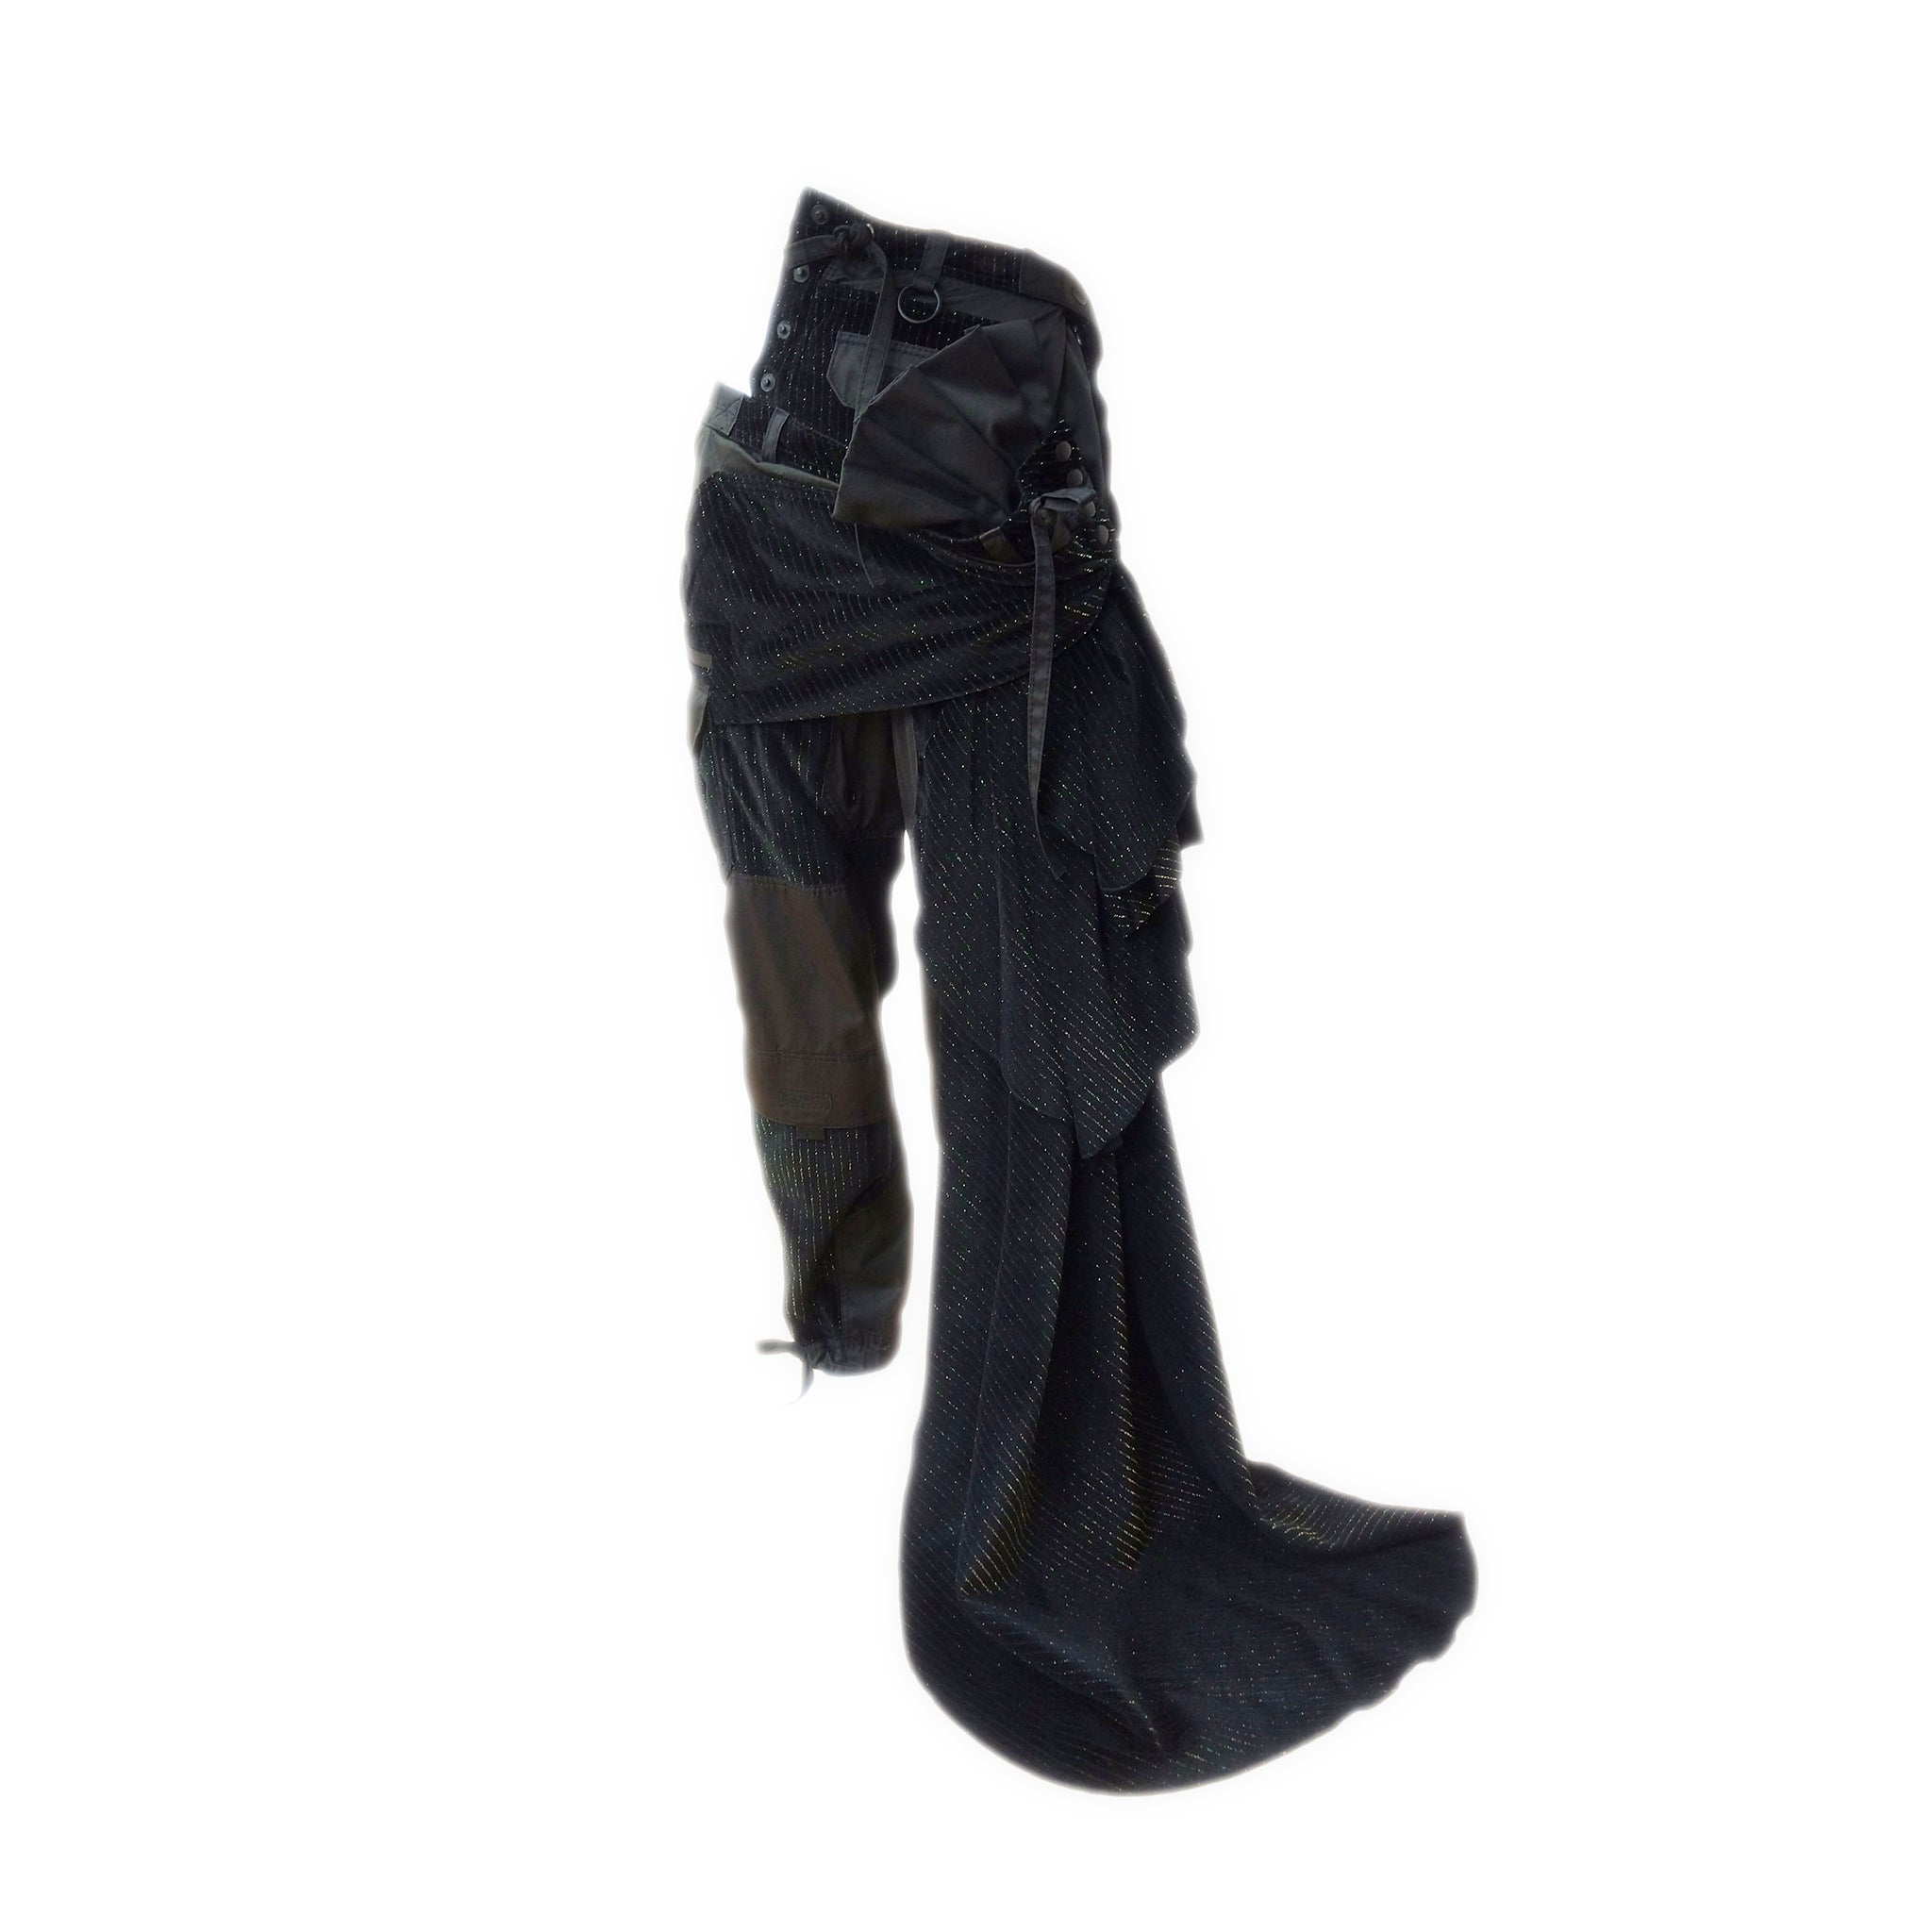 Draped Cargo Trousers